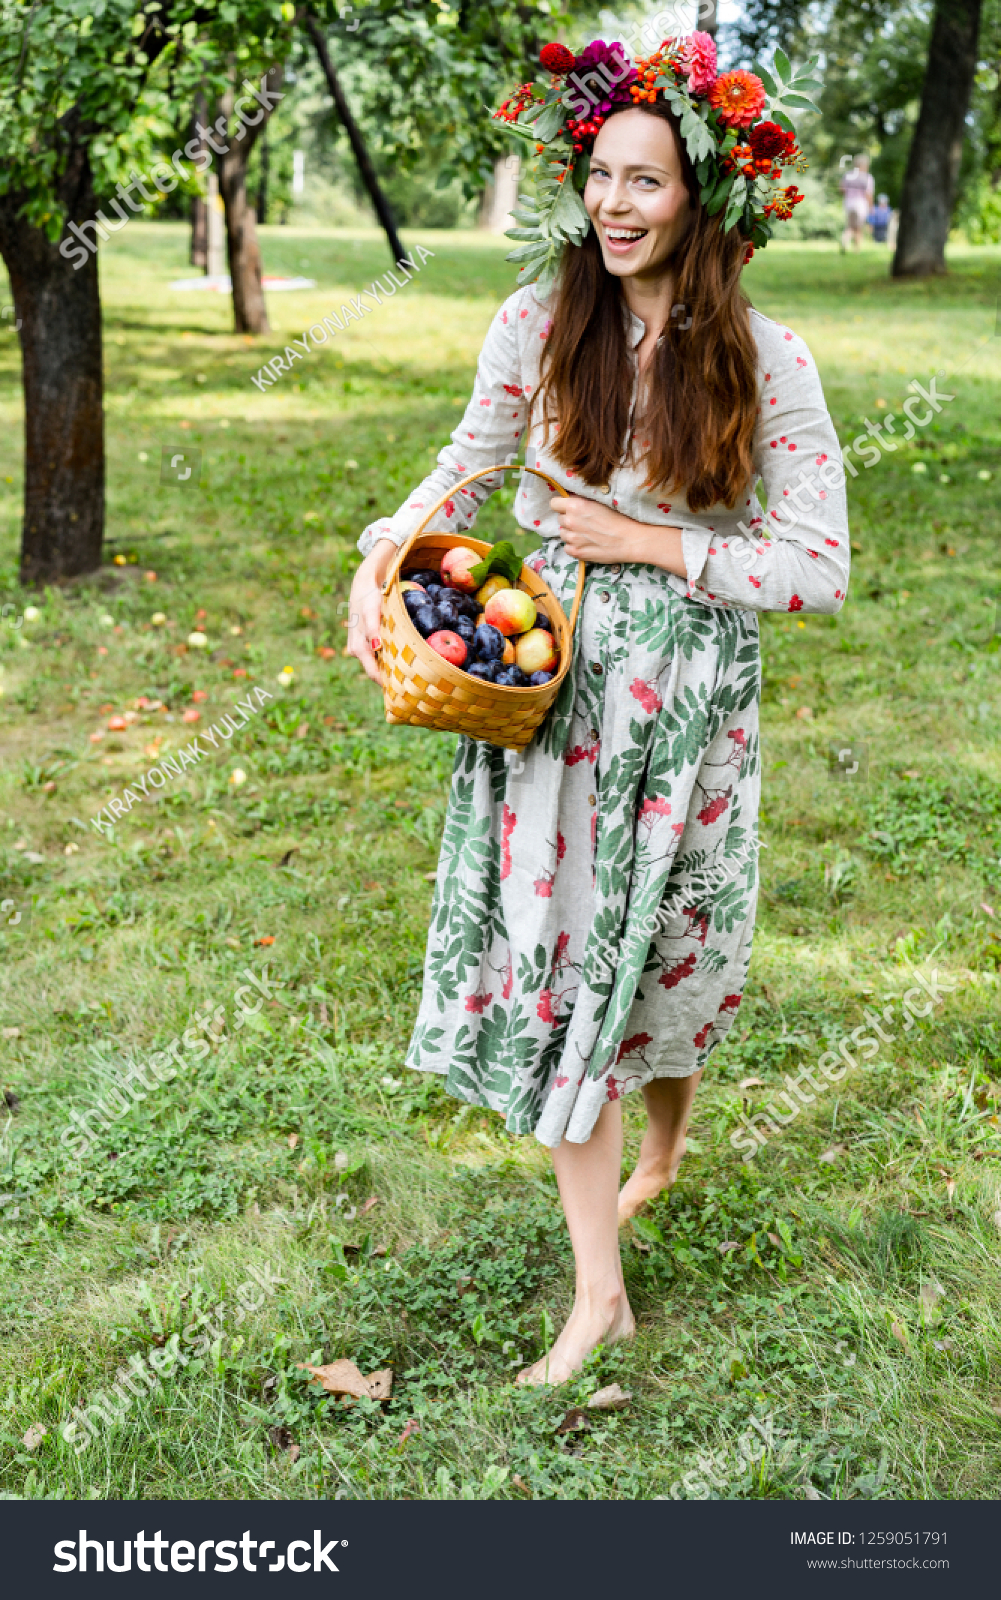 https://image.shutterstock.com/shutterstock/photos/1259051791/display_1500/stock-photo-young-woman-with-a-basket-of-fruits-plums-and-apples-1259051791.jpg